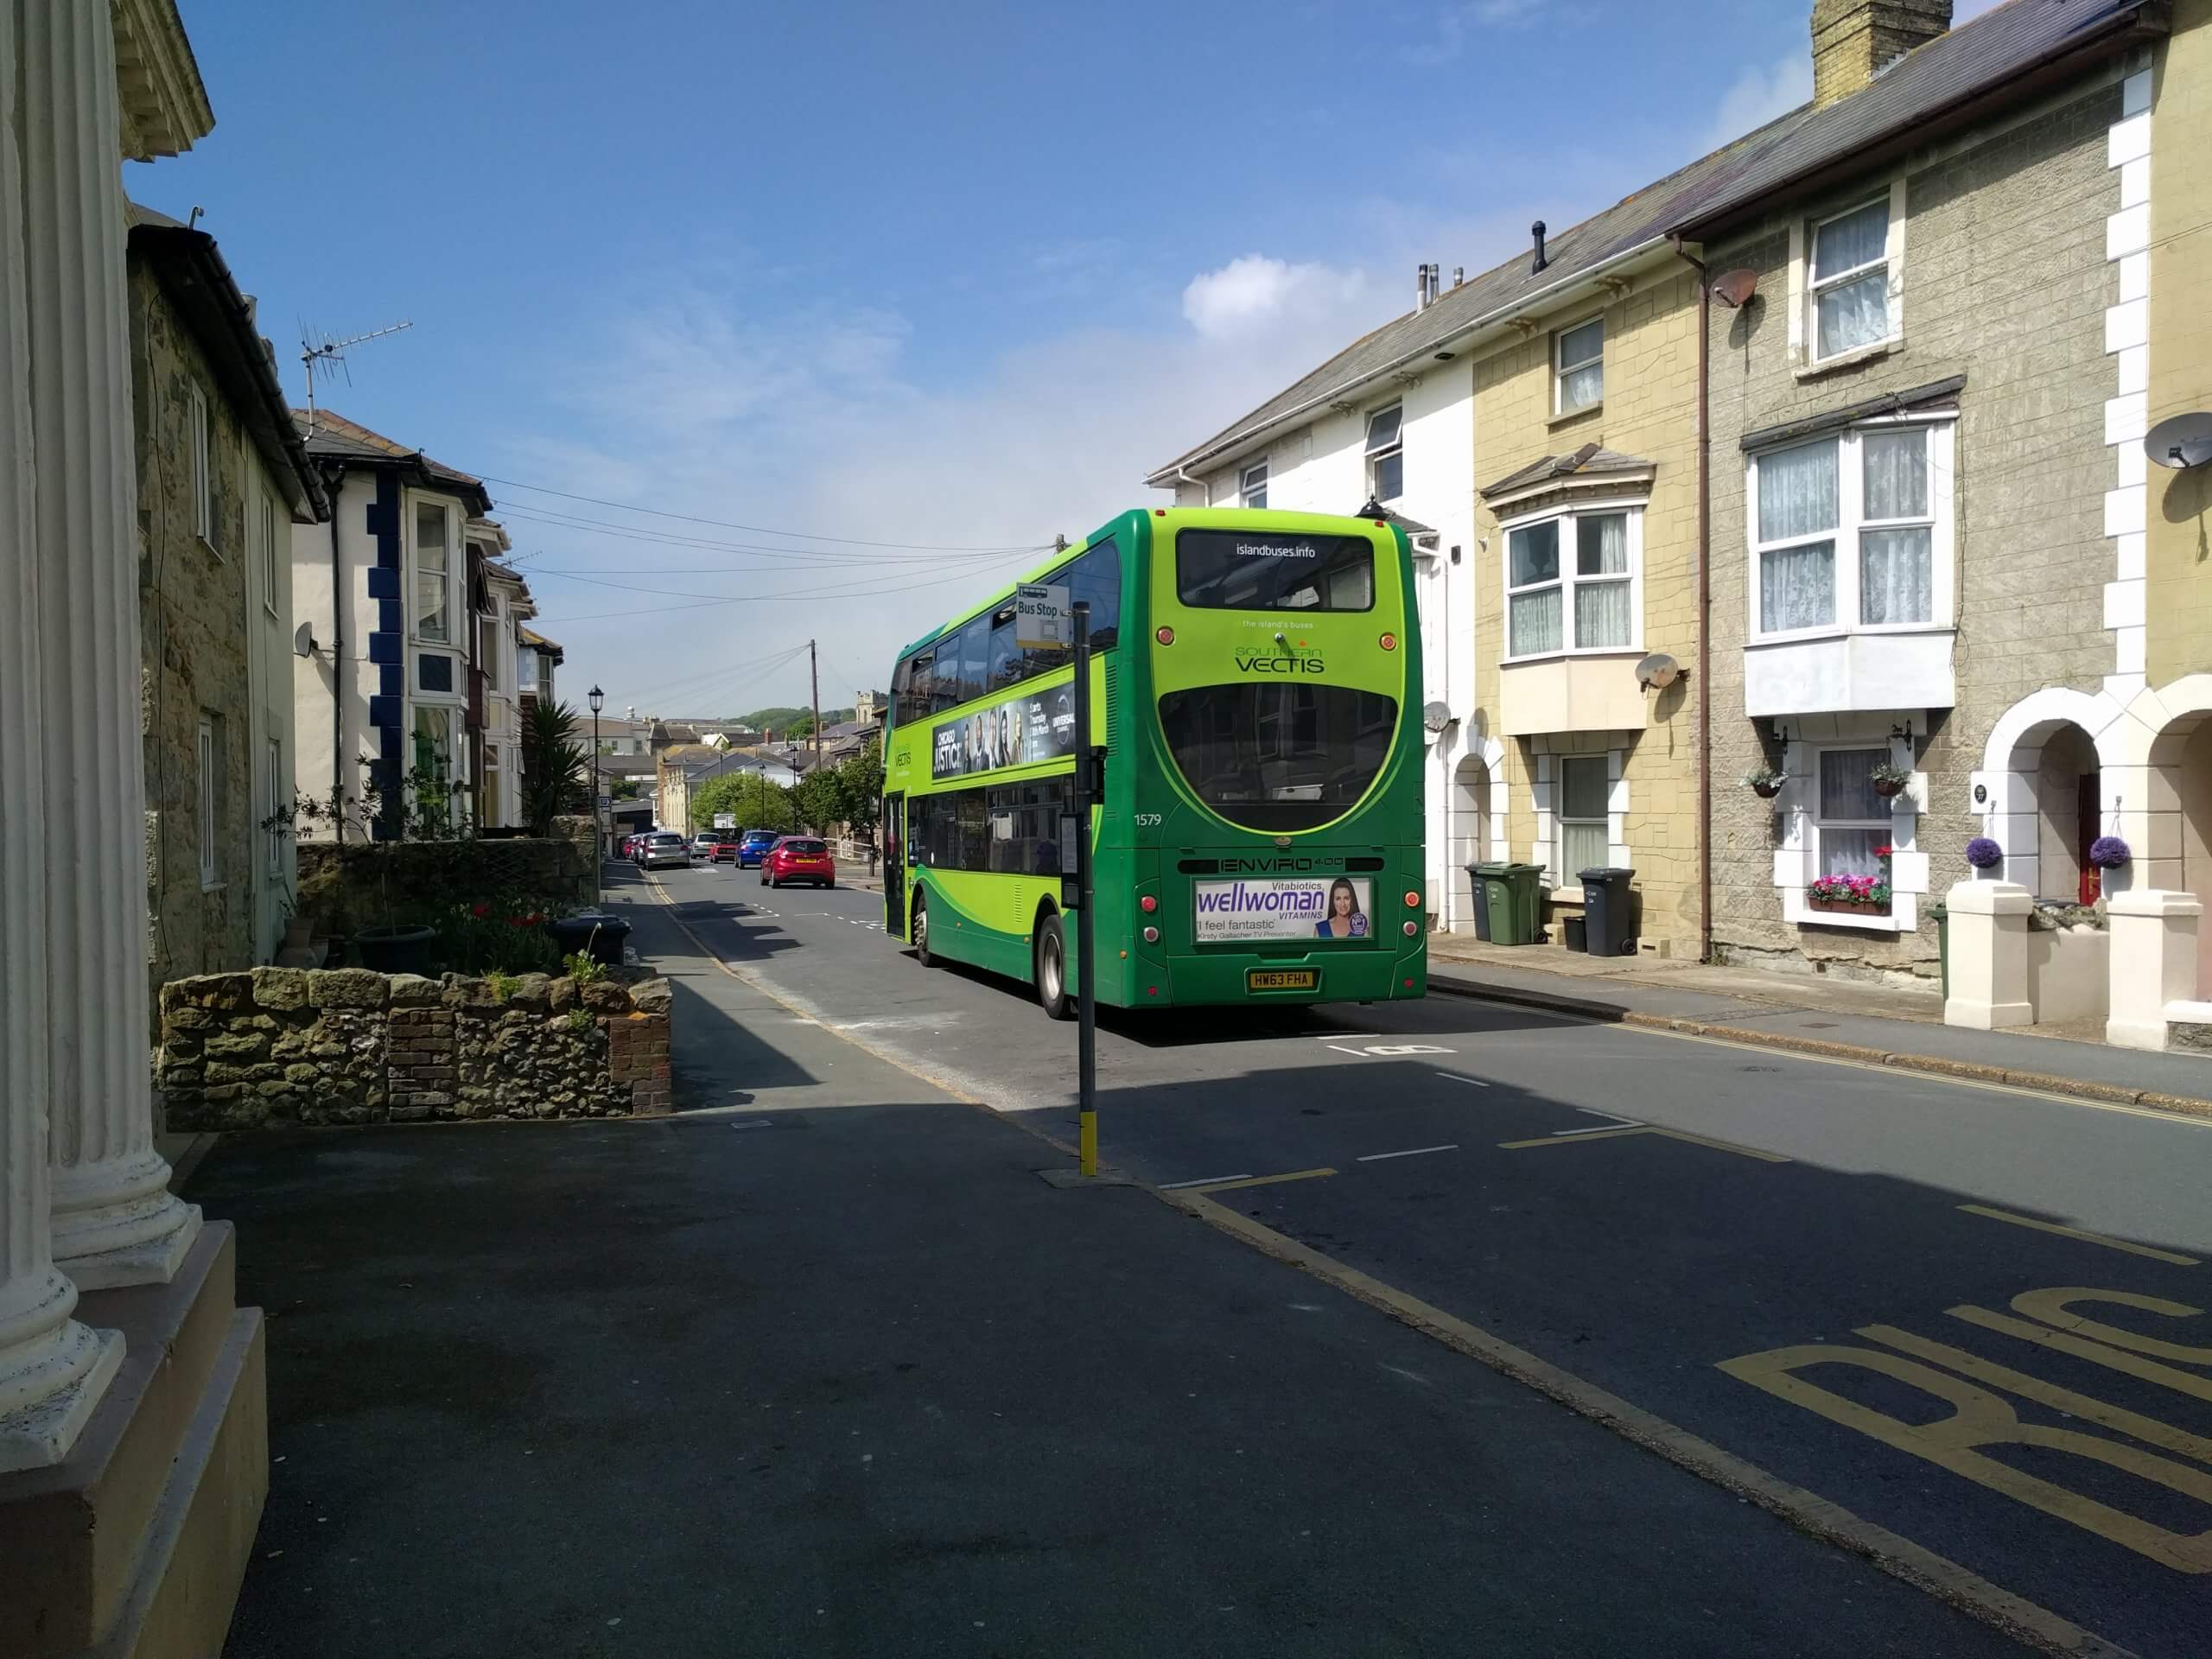 Newport to Ventnor via Blackgang Chine – Route 6 from Southern Vectis